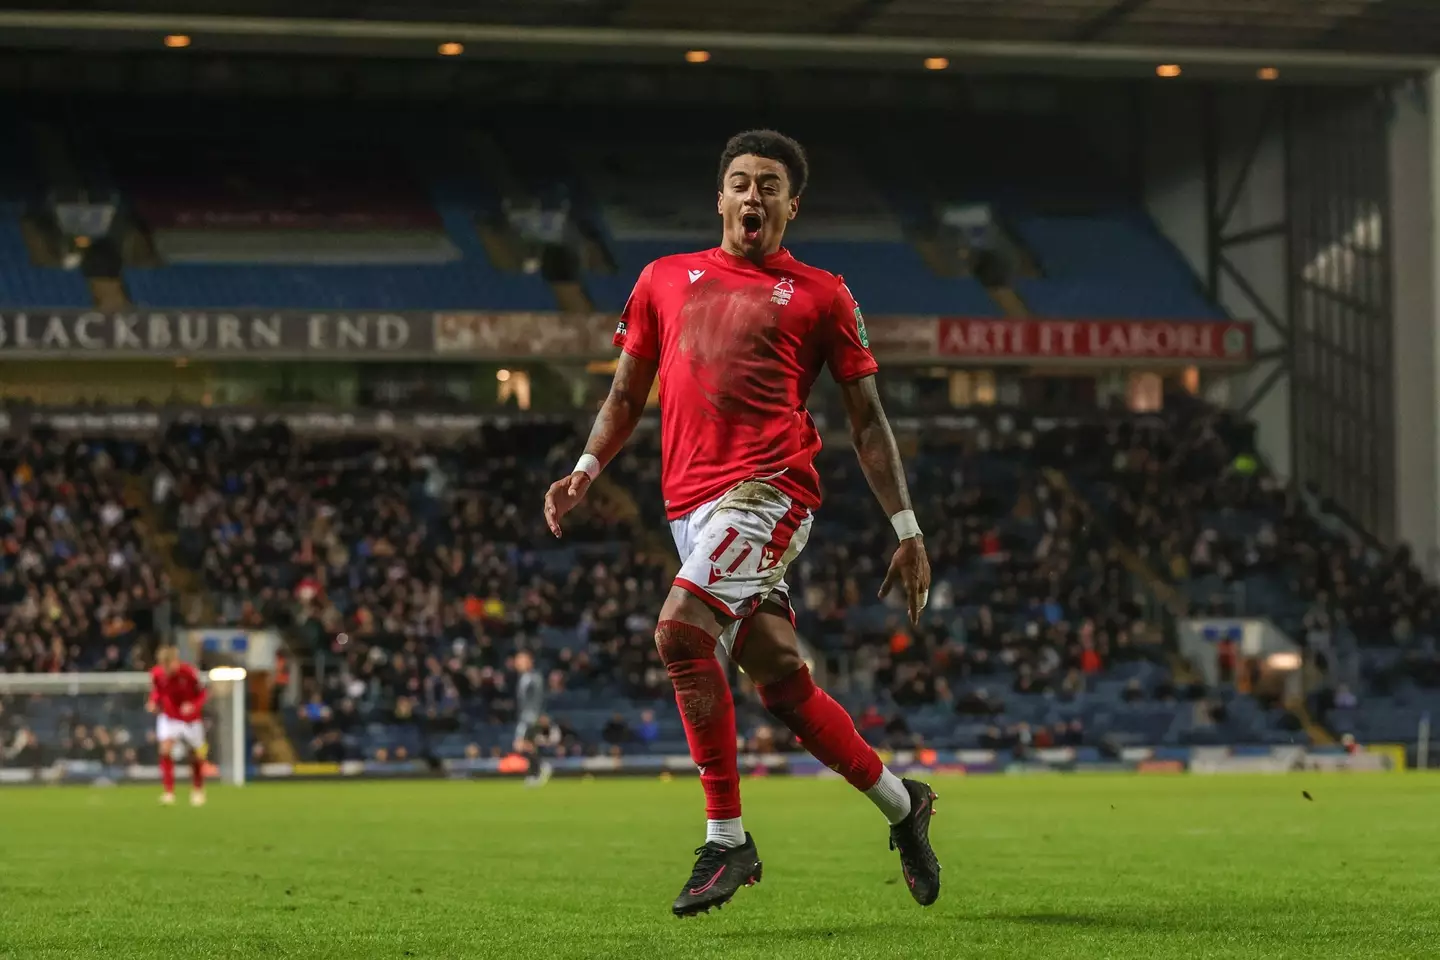 Lingard celebrates one of his two goals for Forest, both coming in the Carabao Cup. Image: Alamy